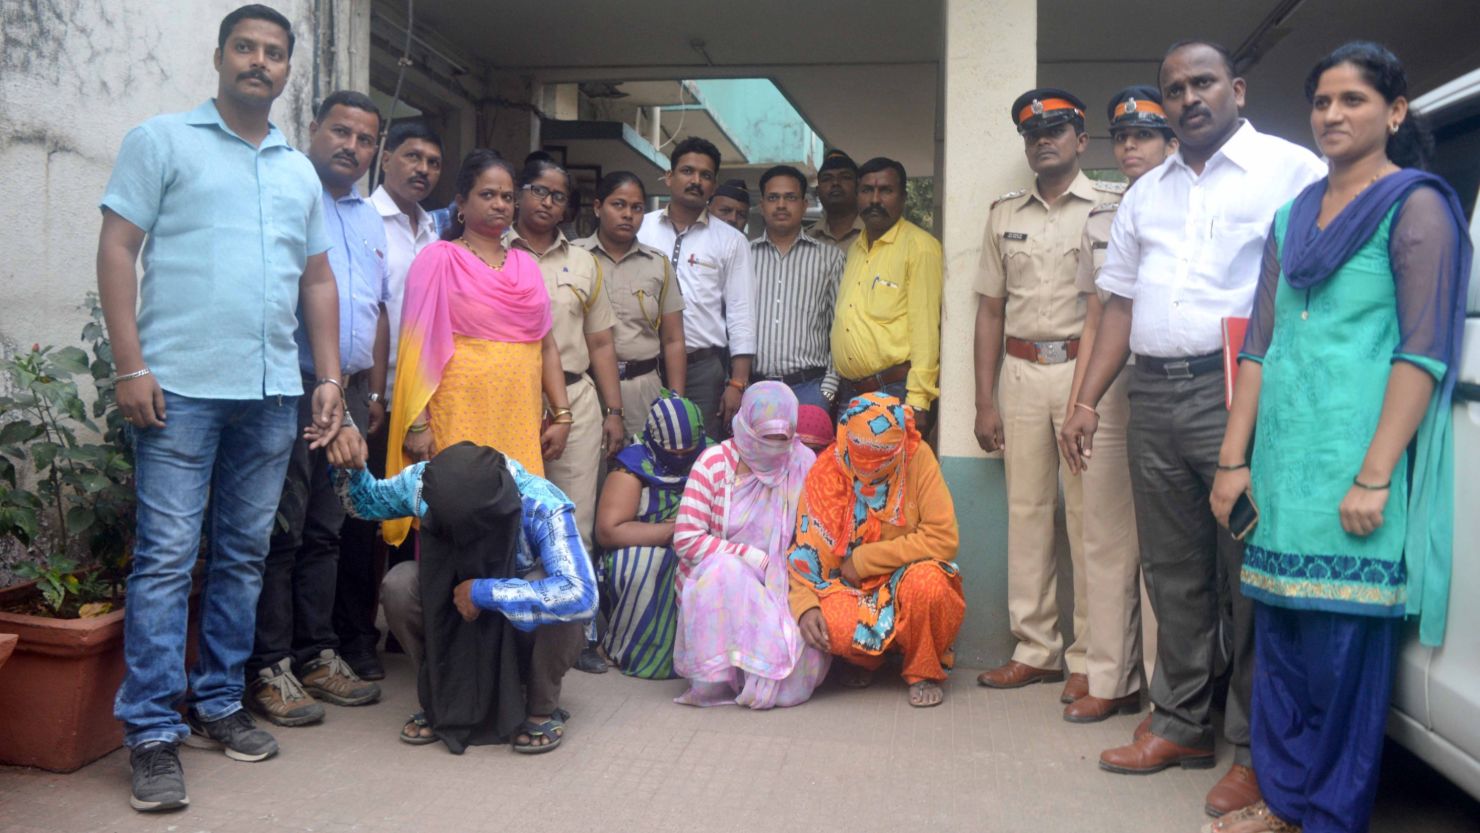 Police stand with the members of an alleged child trafficking gang in Mumbai.